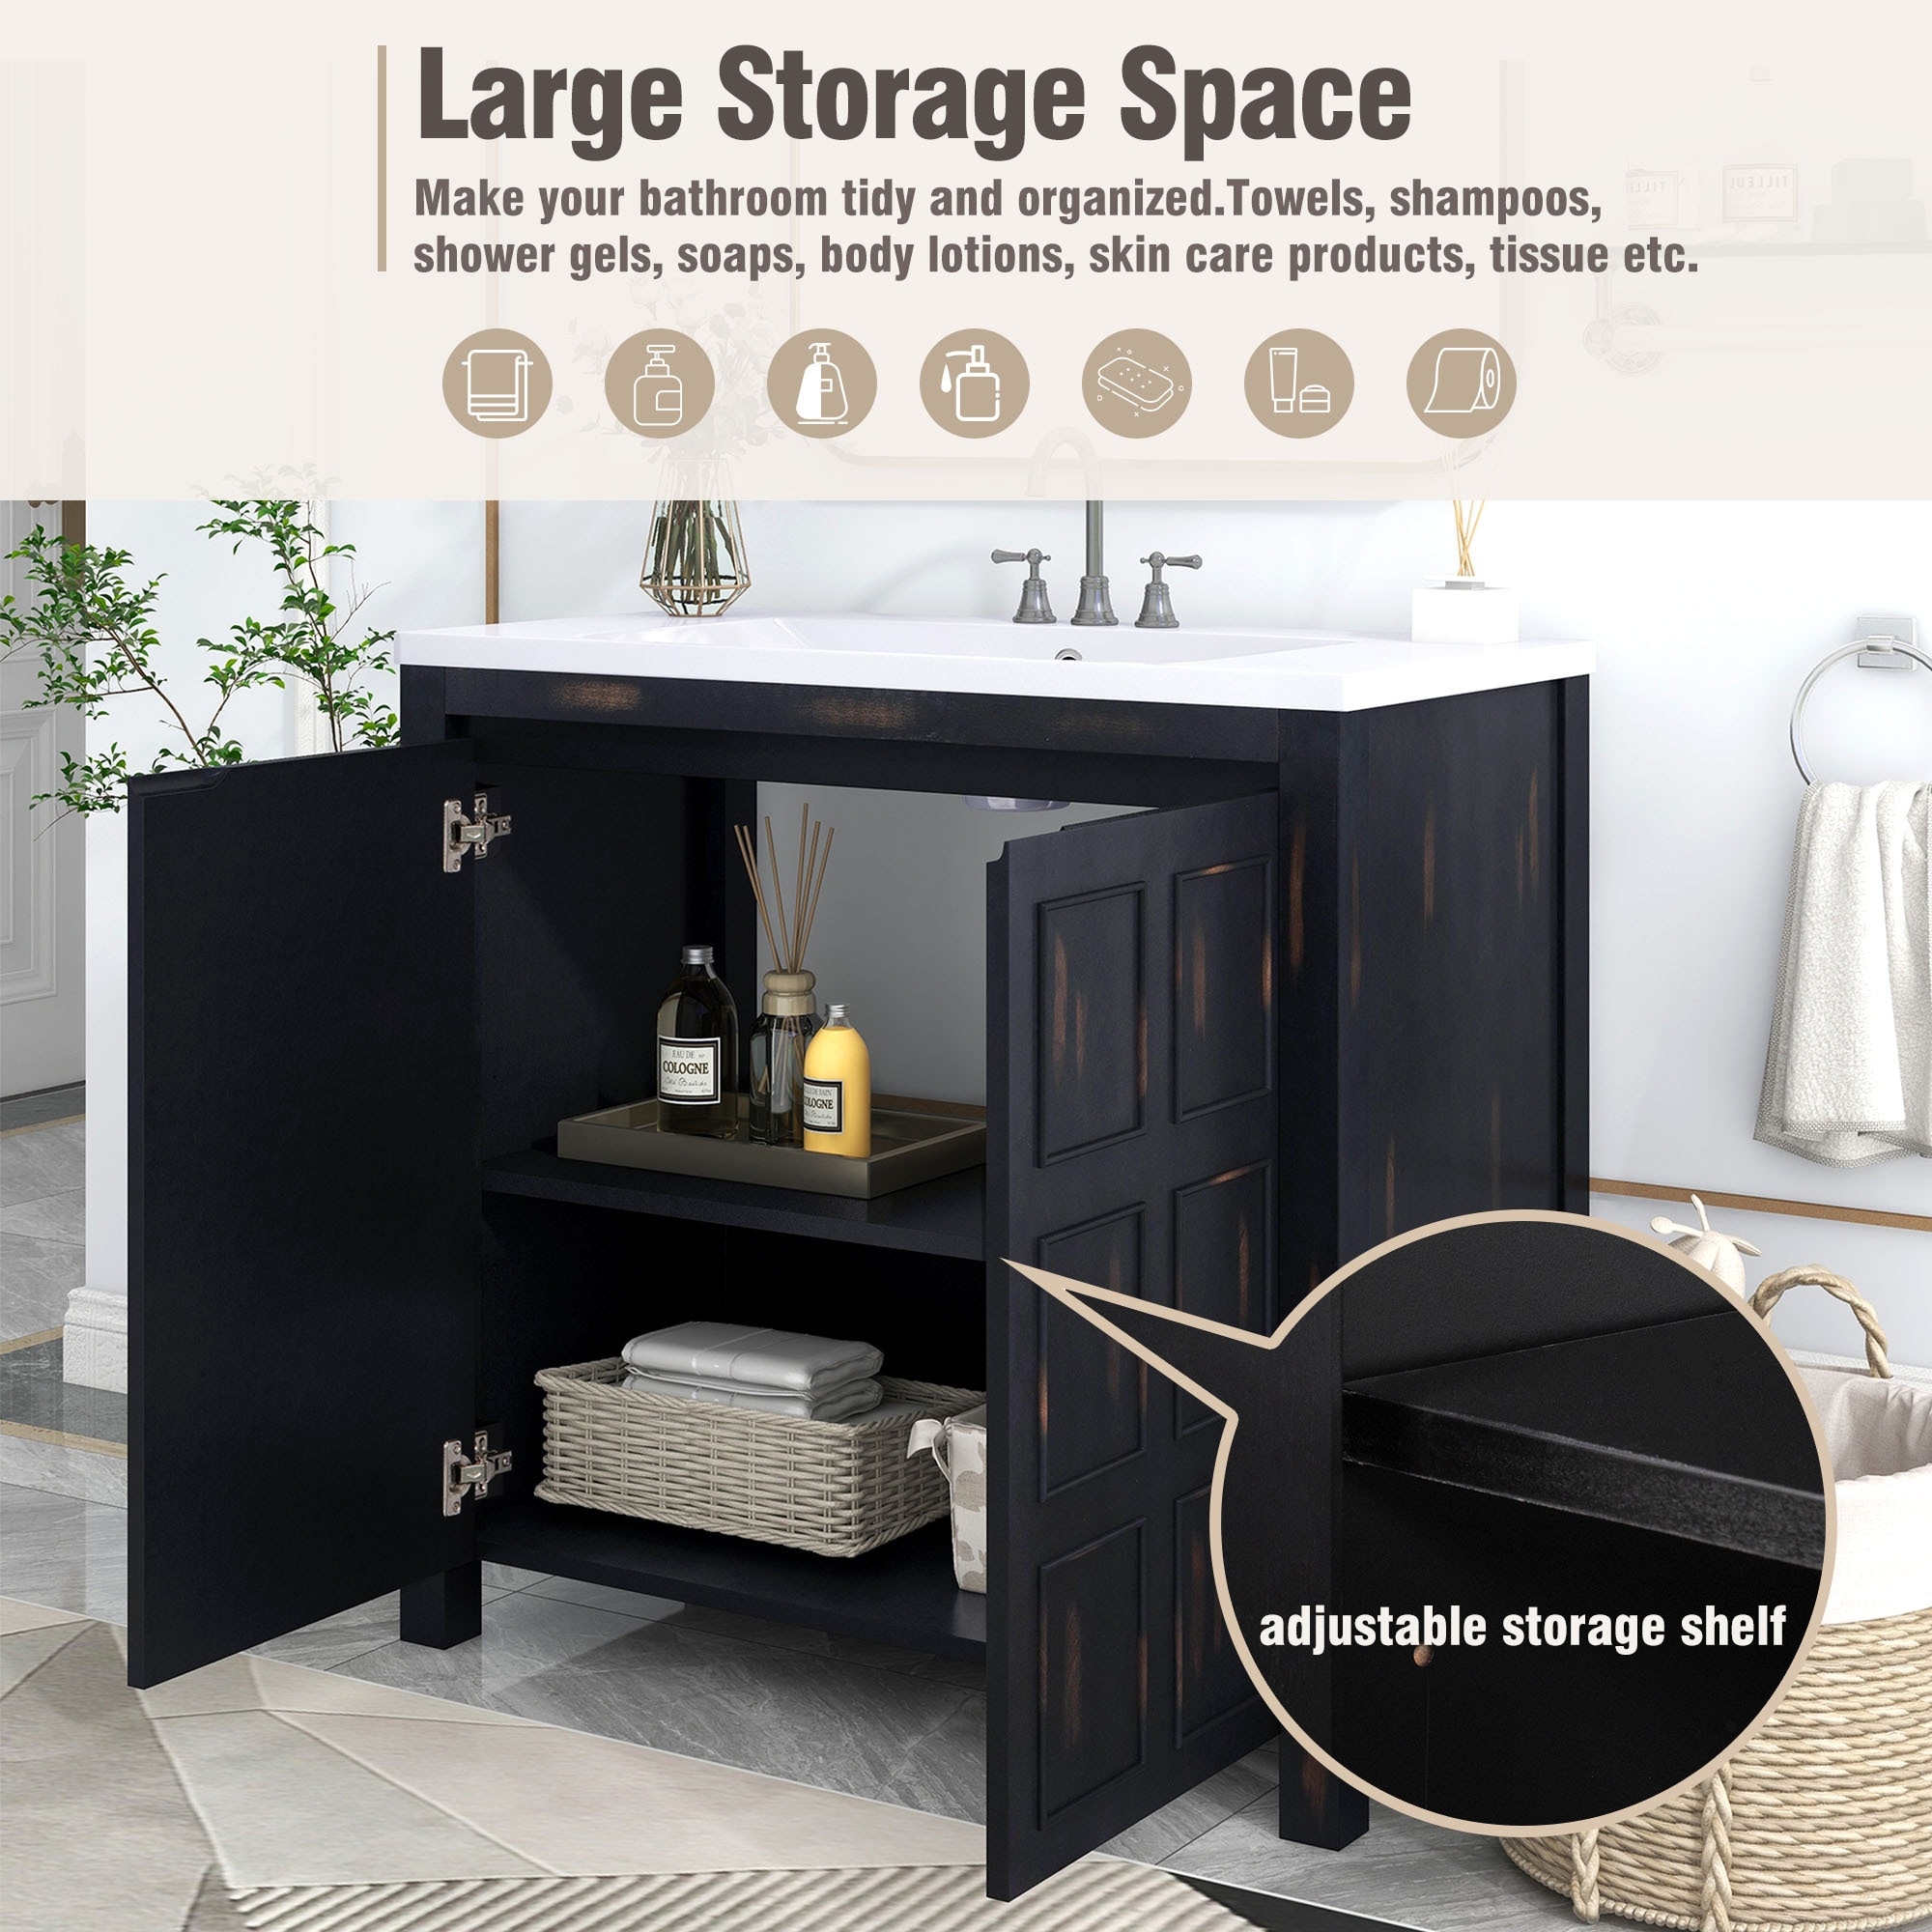 https://ak1.ostkcdn.com/images/products/is/images/direct/7aeed1ef974d1e6c475440f28d4d0bc9aebdeb3f/36%22-Bathroom-Vanity-Organizer-with-Sink%2C-Combo-Cabinet-Set%2C-Bathroom-Storage-Cabinet%2C-Retro-Espresso.jpg